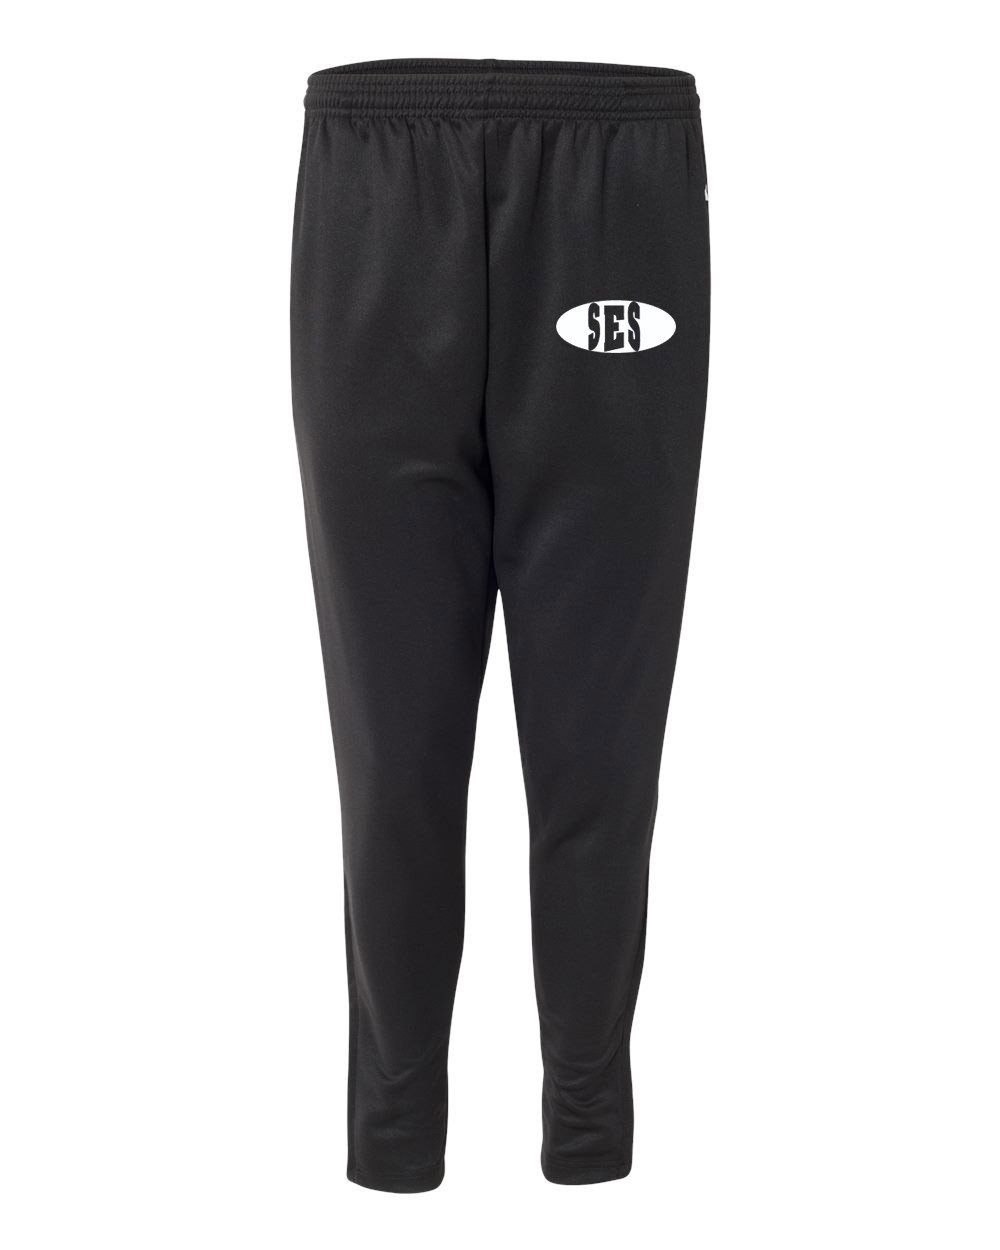 SES Spirit Trainer Pants w/ Logo #26- Please Allow 3-4 Weeks for Fulfillment